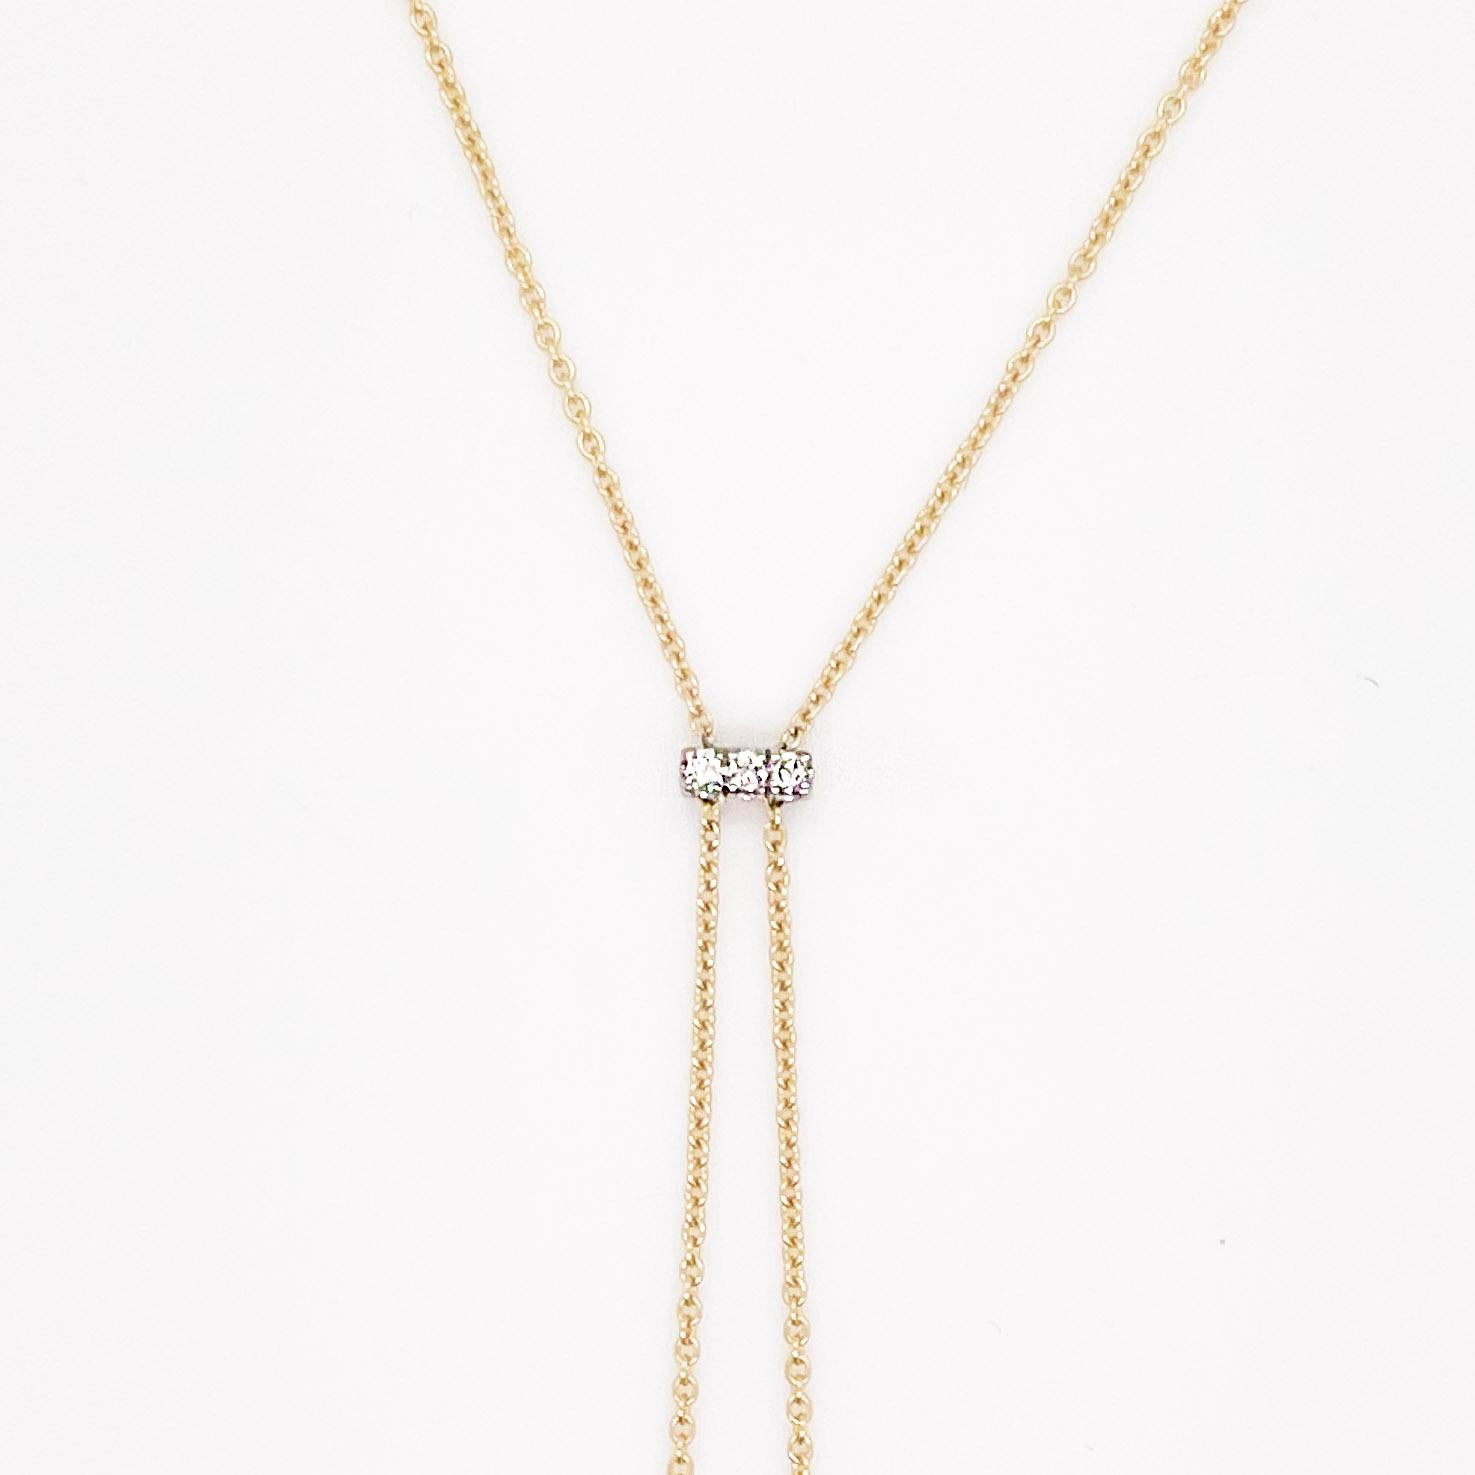 This striking makes quite an iconic statement with diamonds in the center and on the ends of the bars.  It hangs beautifully on anyone’s neck and is great with a v shape or rounded neckline. We had one client buy this necklace for their wedding